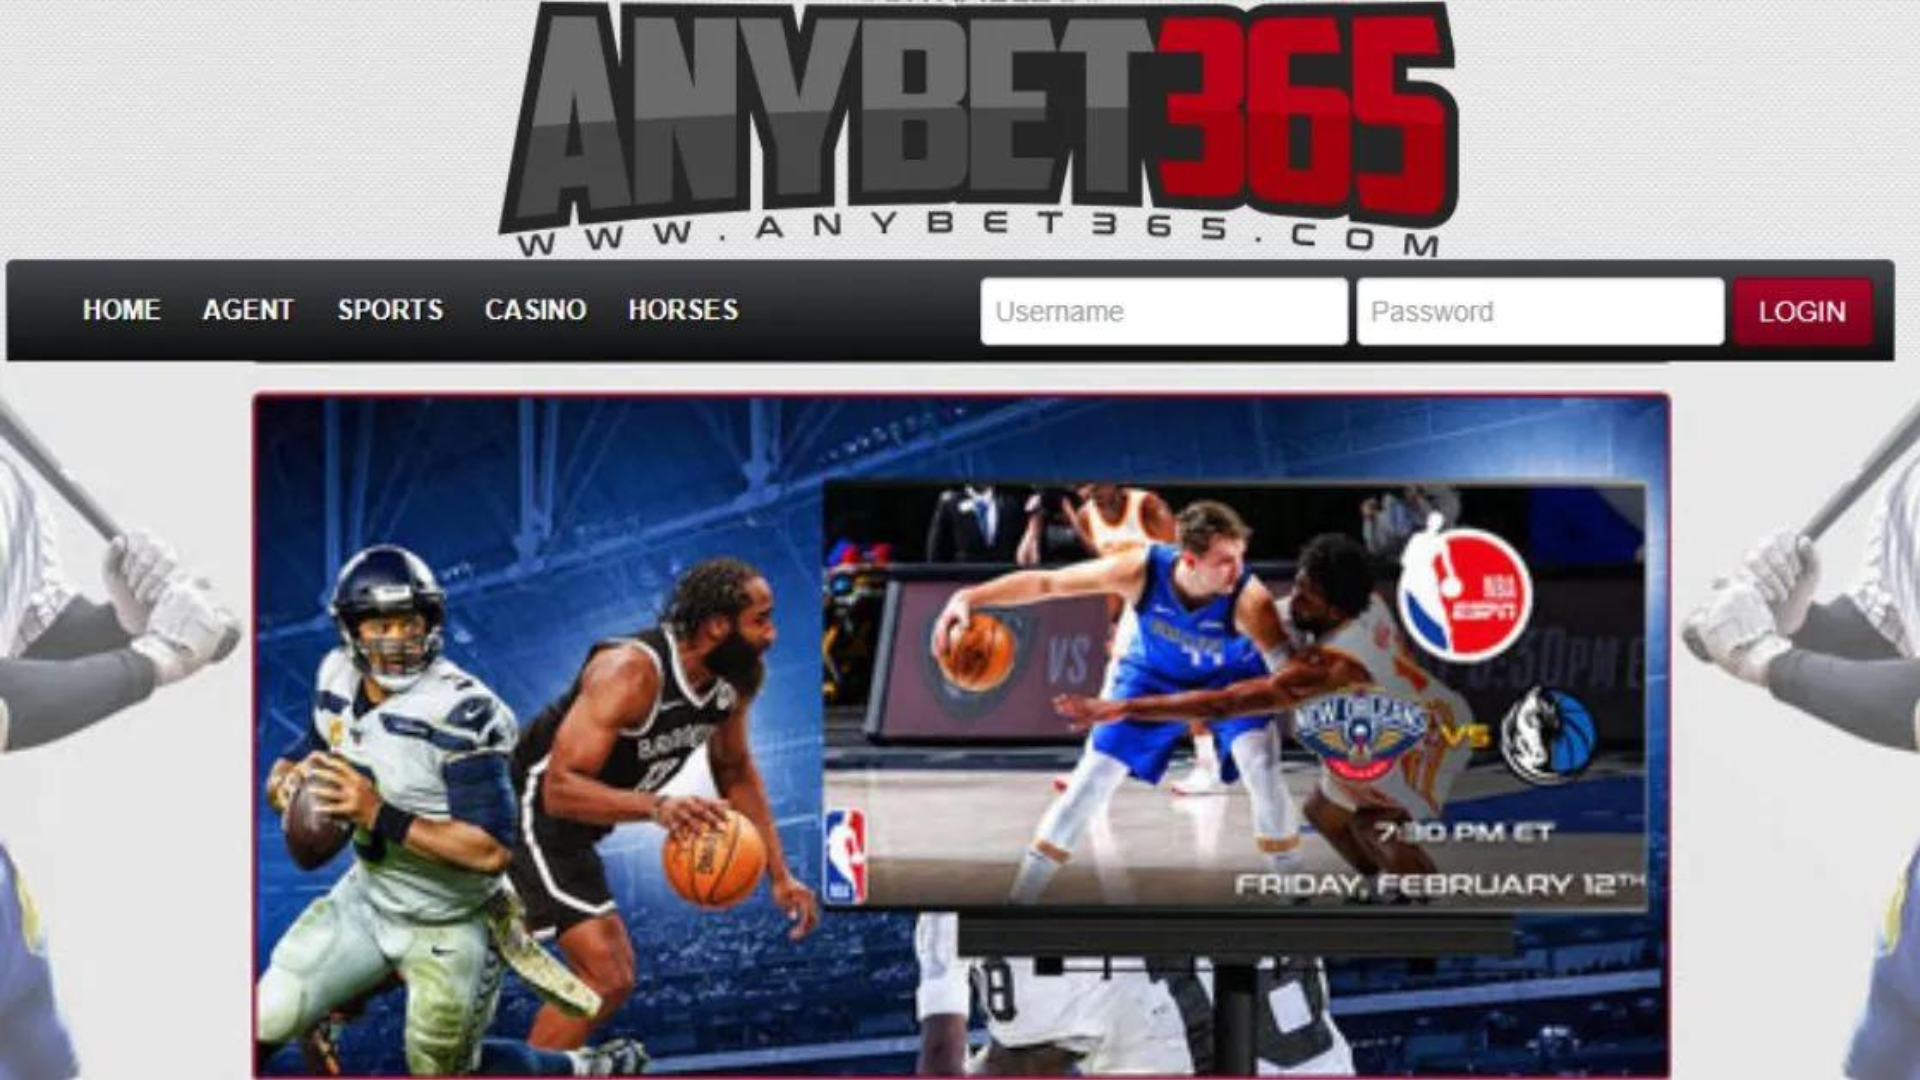 Anybet365 website with some sports men players